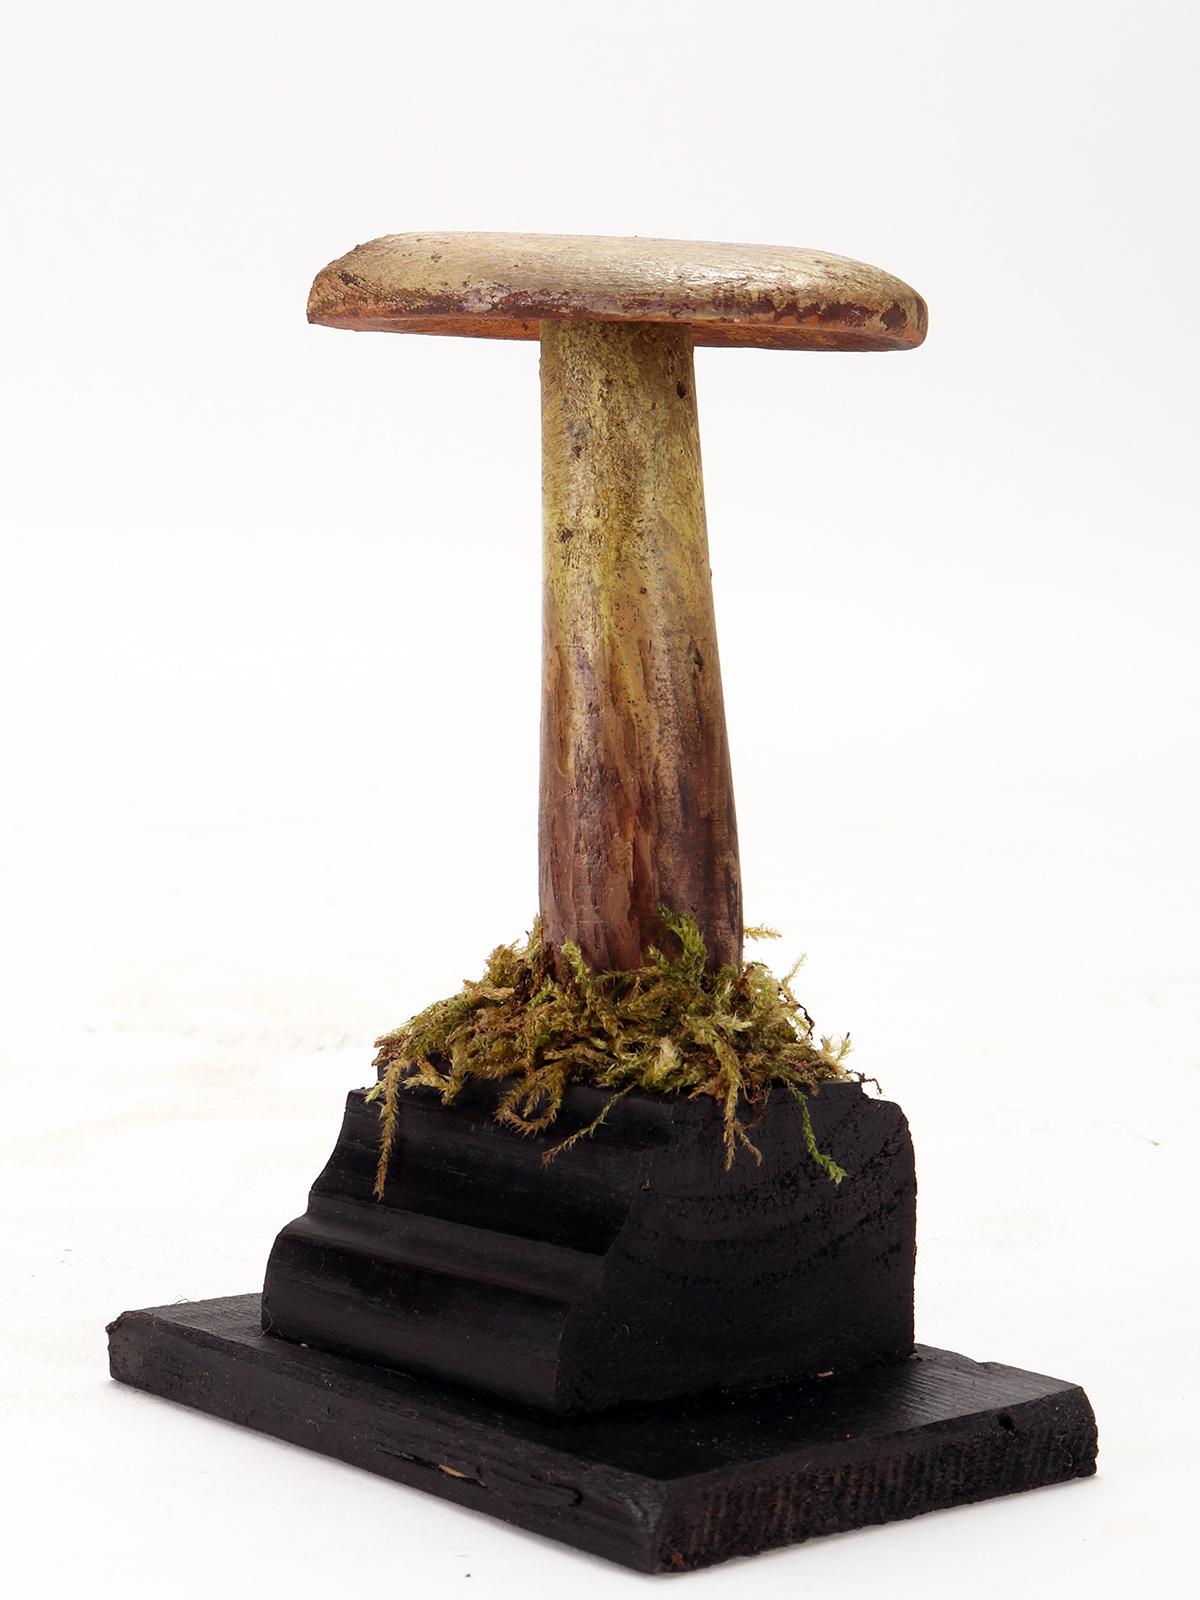 A diorama with 7 botanical models of various species of mushrooms, educational use, made of painted plaster and paper mache, mounted on rectangular wooden bases in black with moss and hay. The models are placed inside a black laquered wooden case,